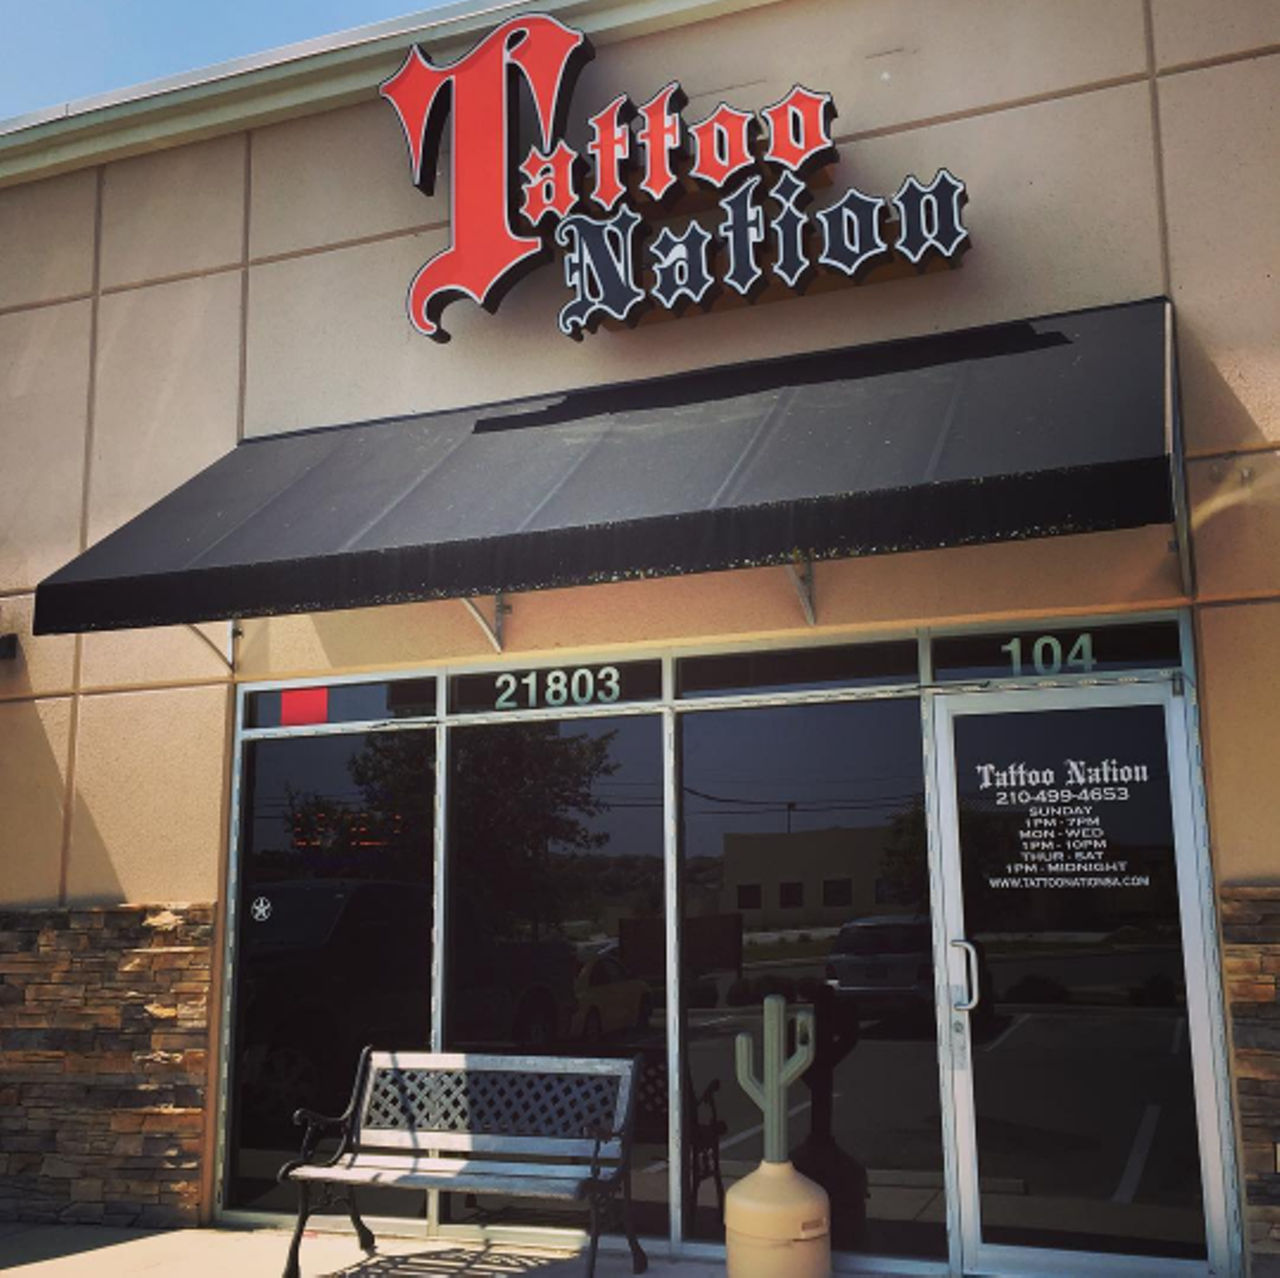 Tattoo Nation
Address: 21803 Encino Commons Blvd #104
Call (210) 499-4653 for more information. 
Photo via Facebook/Tattoo Nation